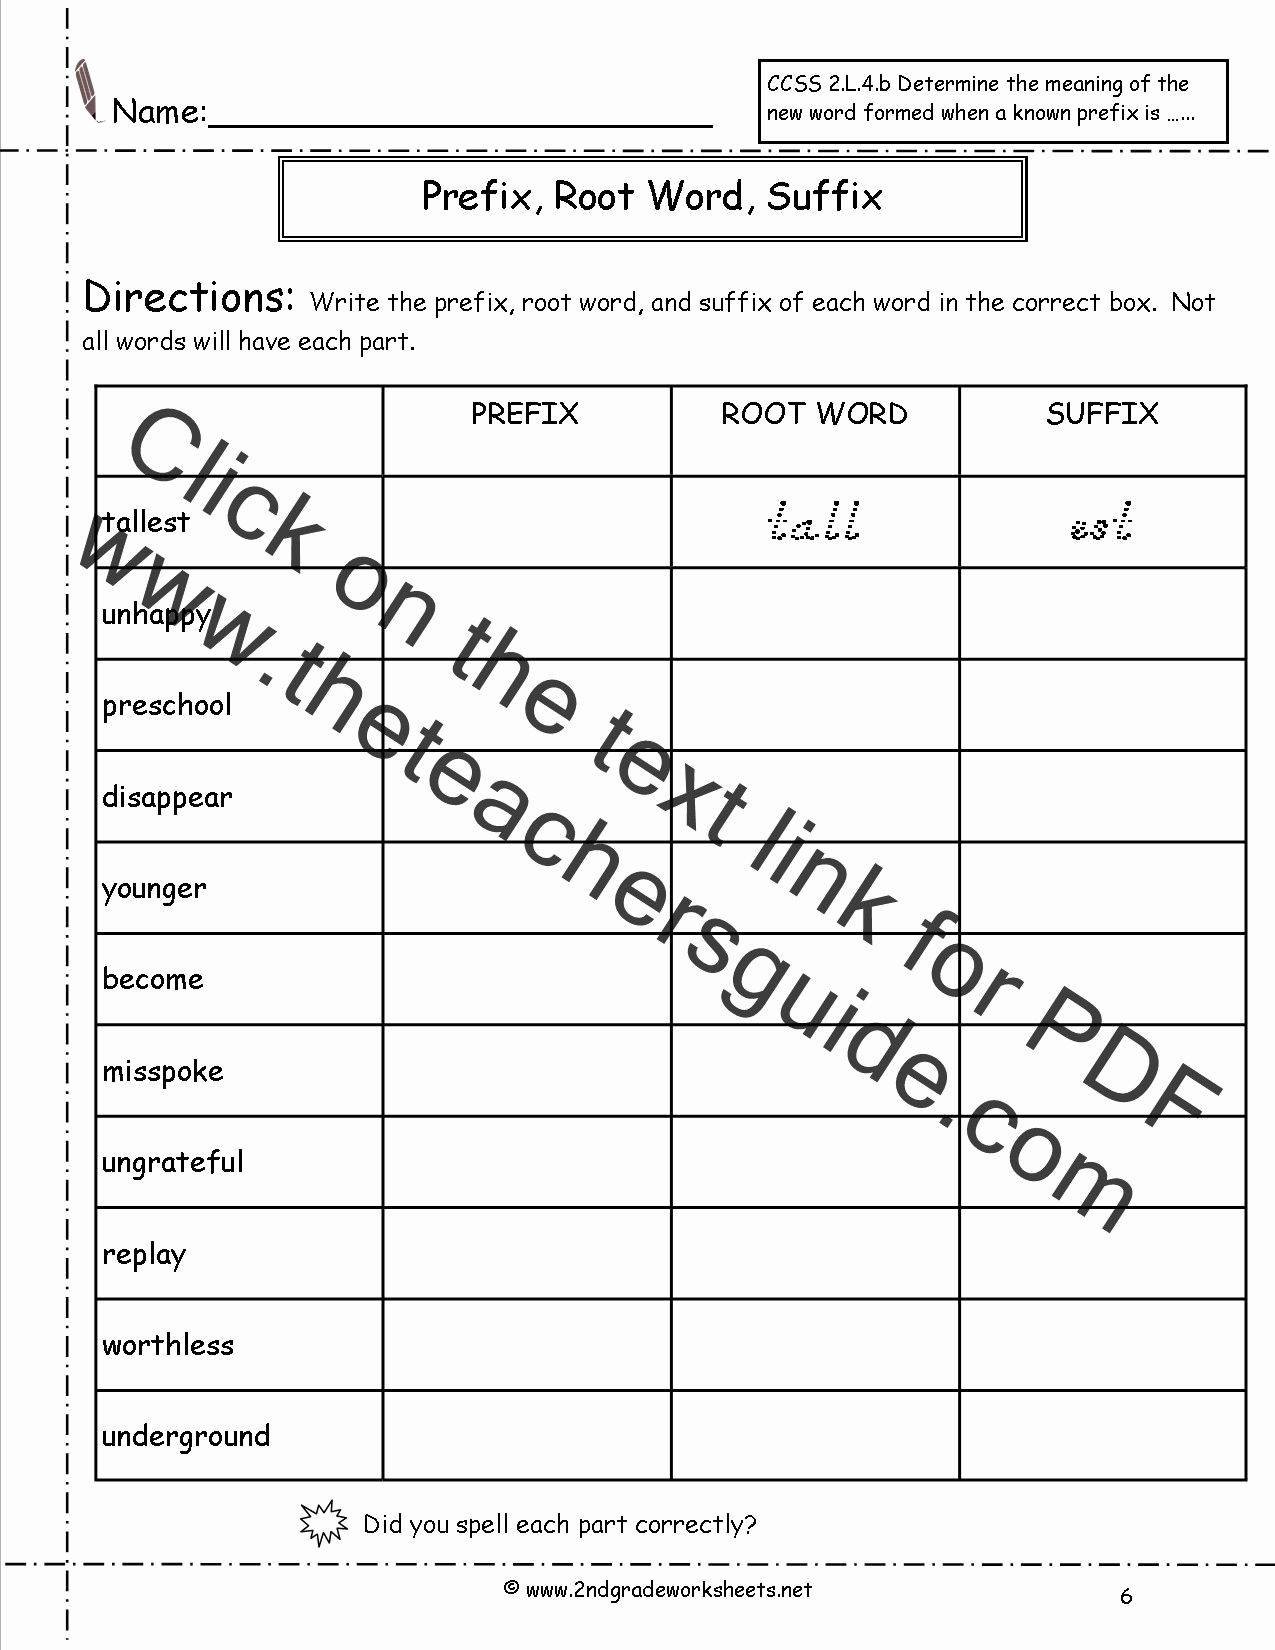 Suffix Worksheets for 4th Grade Fresh 20 Suffix Worksheets for 4th Grade